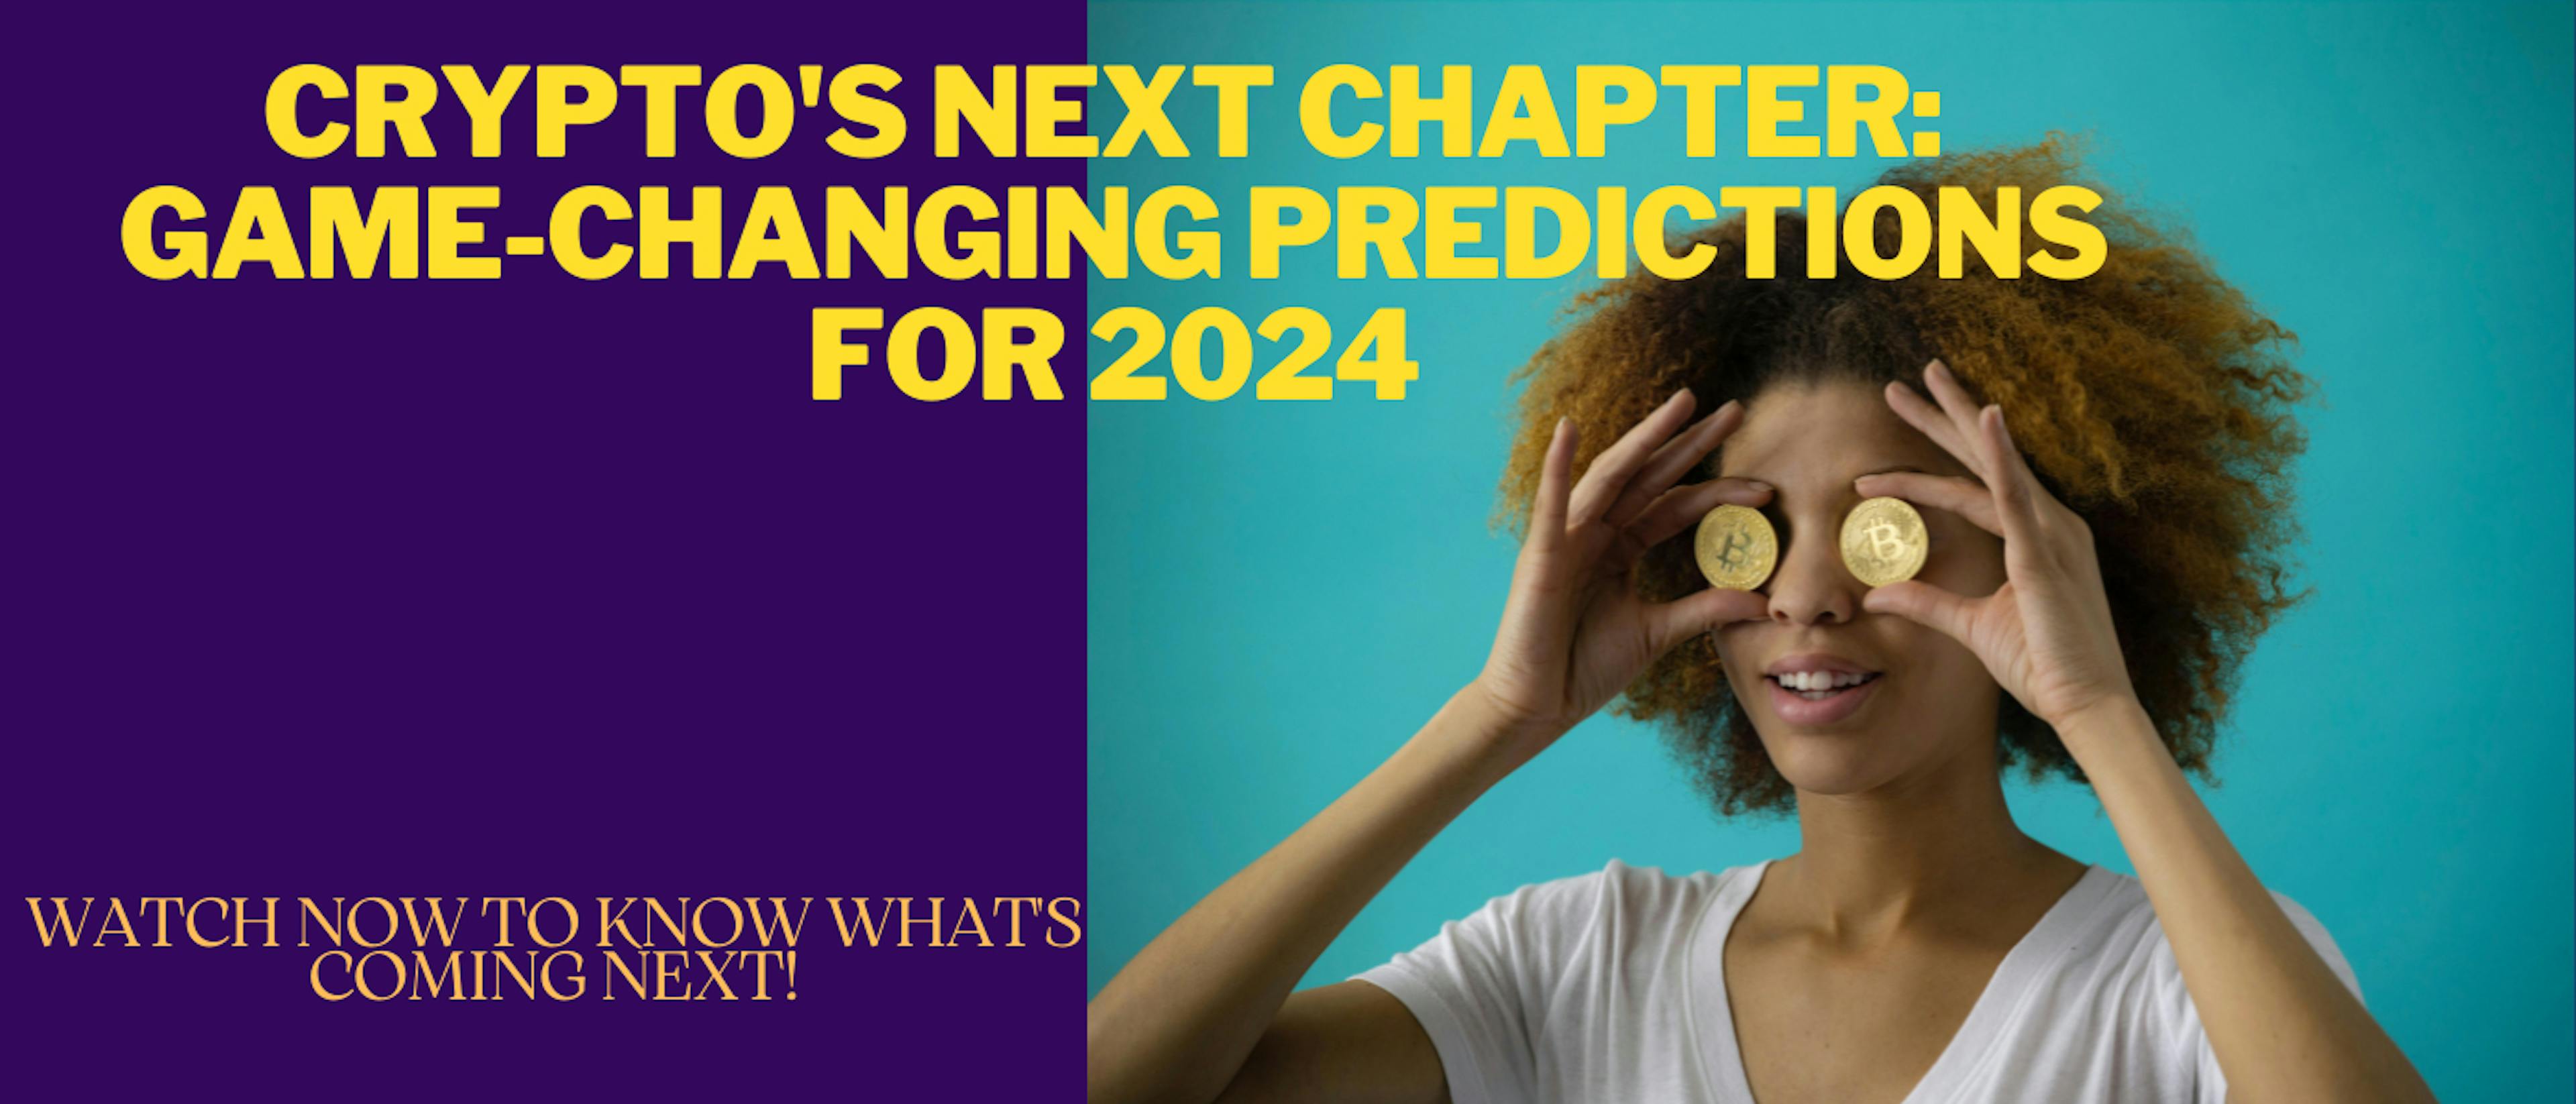 featured image - Crypto's Next Chapter: 2024's Game-Changing Predictions